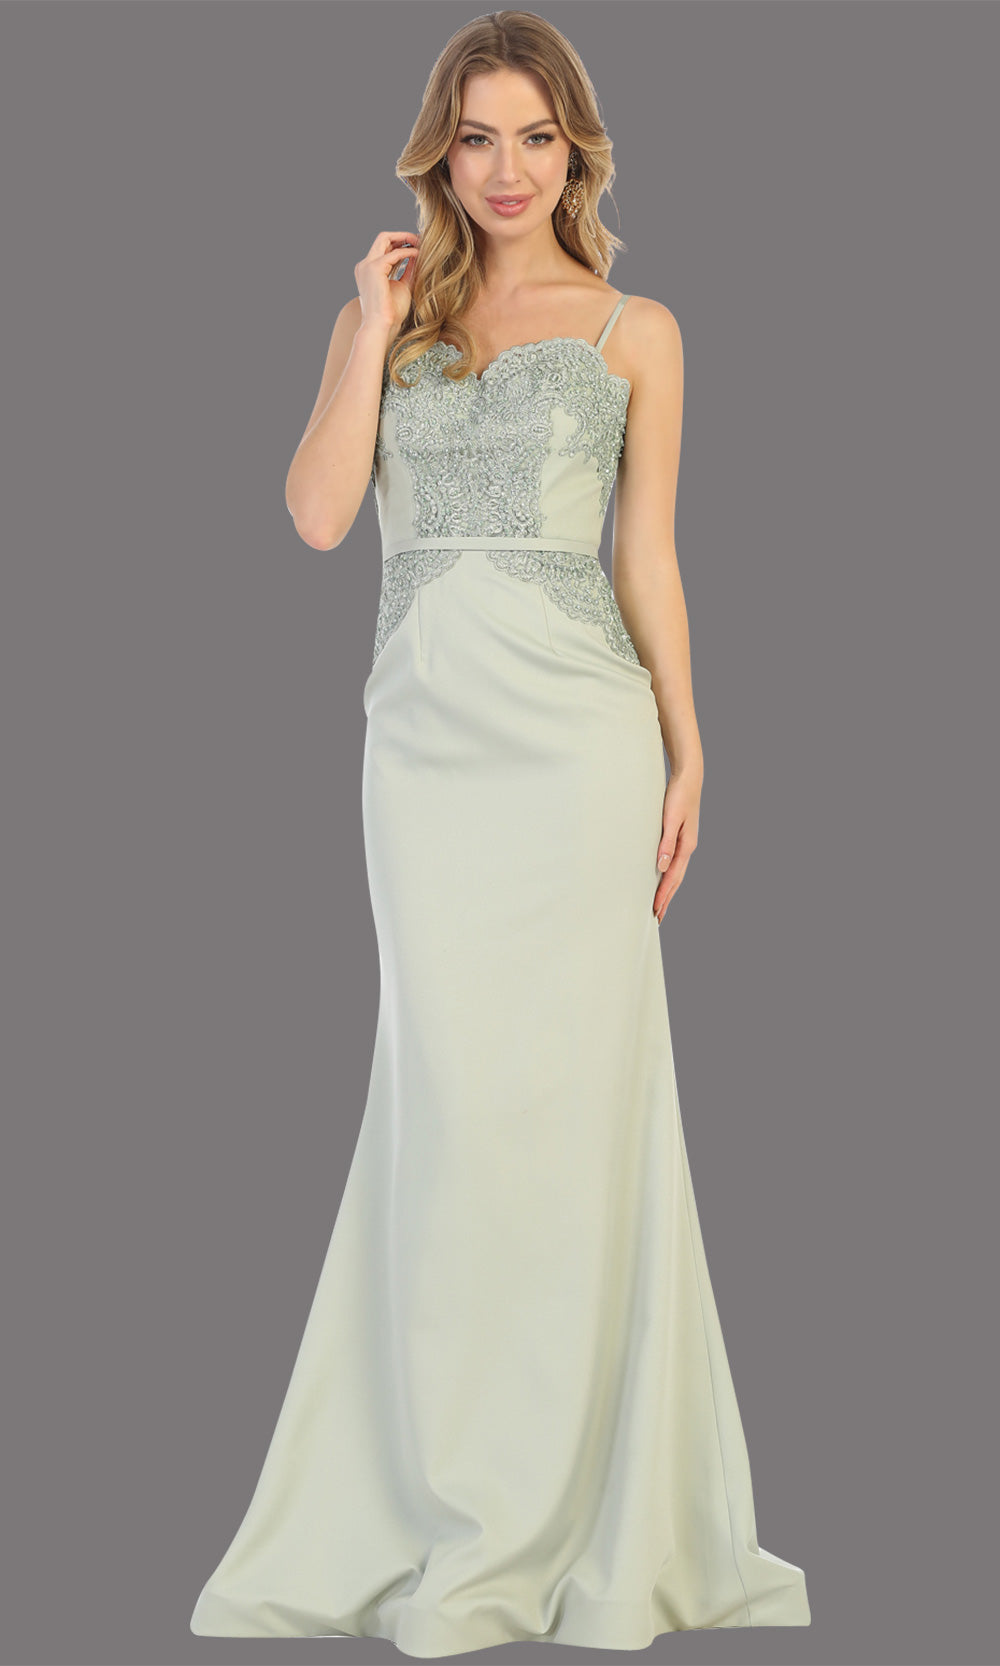 Mayqueen MQ1759 long sage lace top evening fitted dress w/straps. Full length light green gown is perfect for bridesmaids, enagagement/e-shoot dress, wedding guest dress, indowestern gown, formal evening party dress, prom. Plus sizes avail